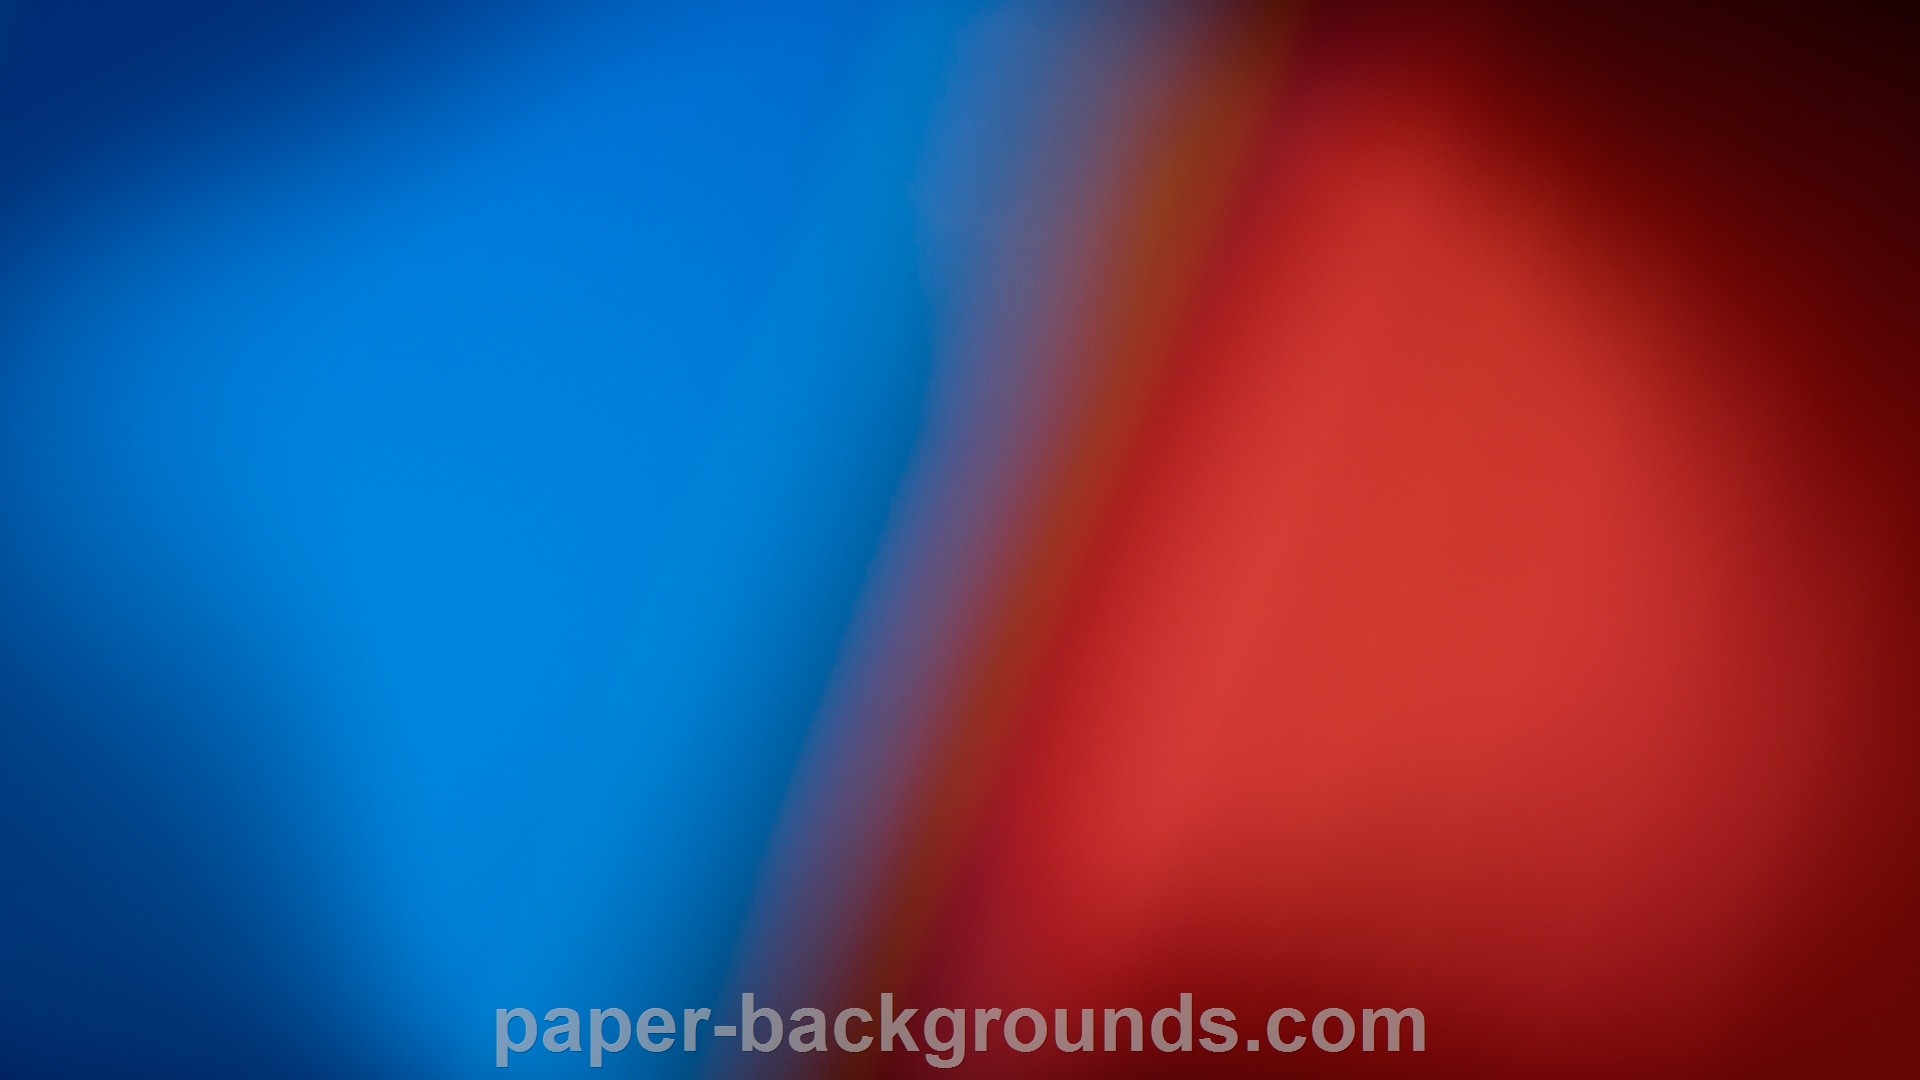 1920x1080 wallpaper, abstract, background, red, blue, backgrounds, textureimages